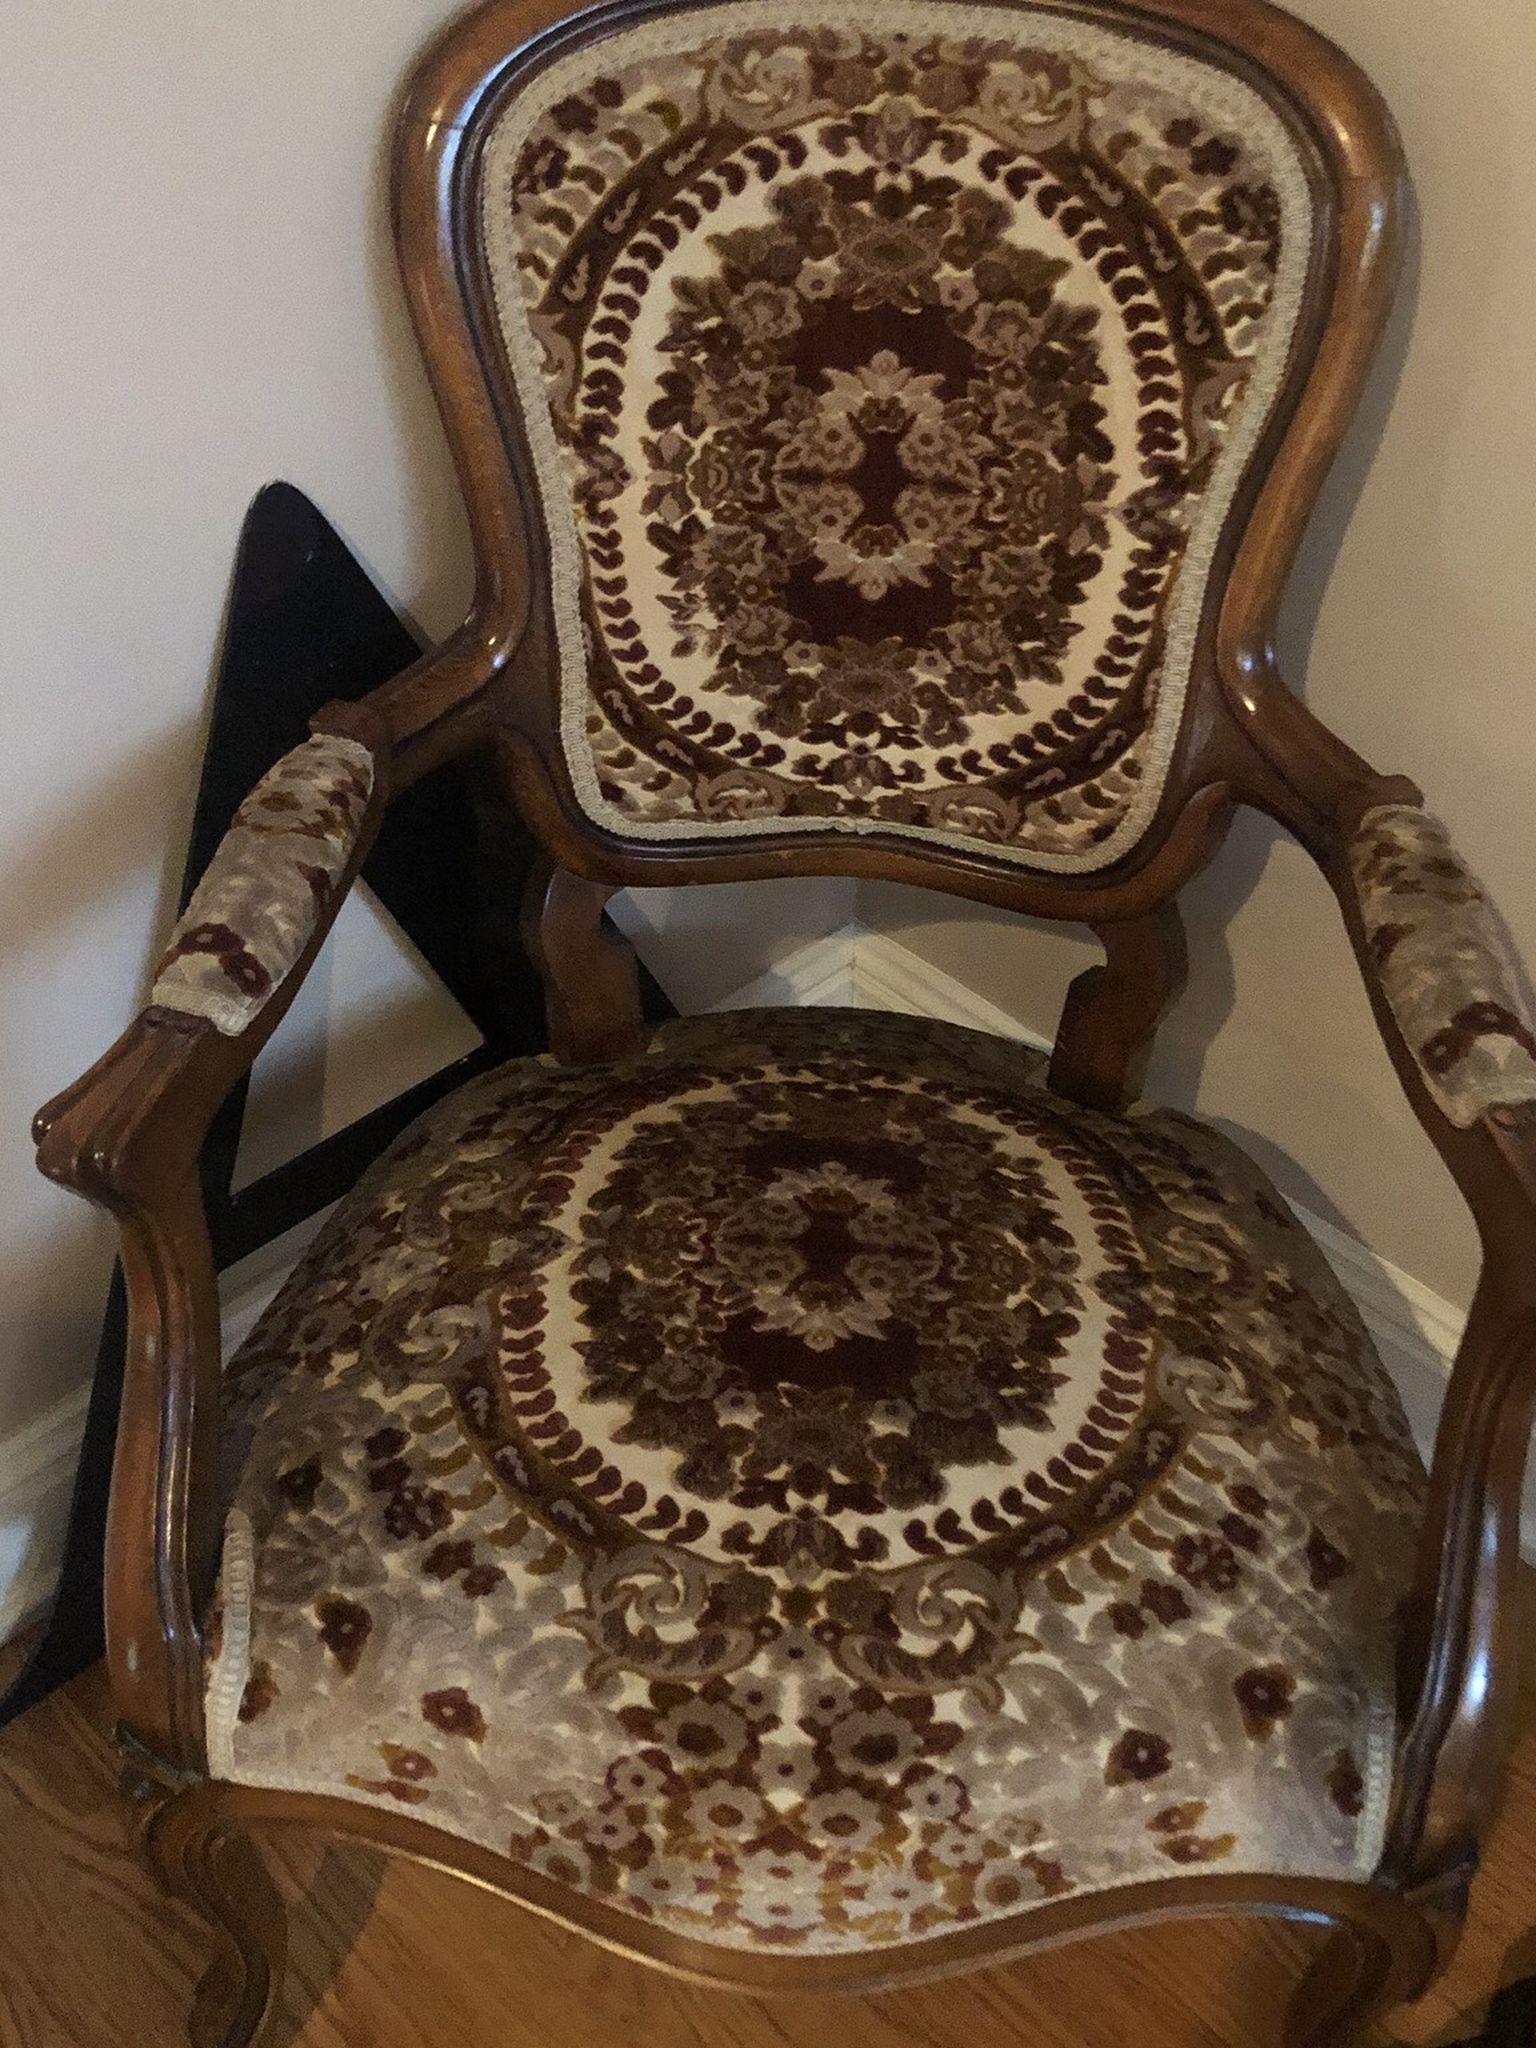 Pair Of Victorian Chairs